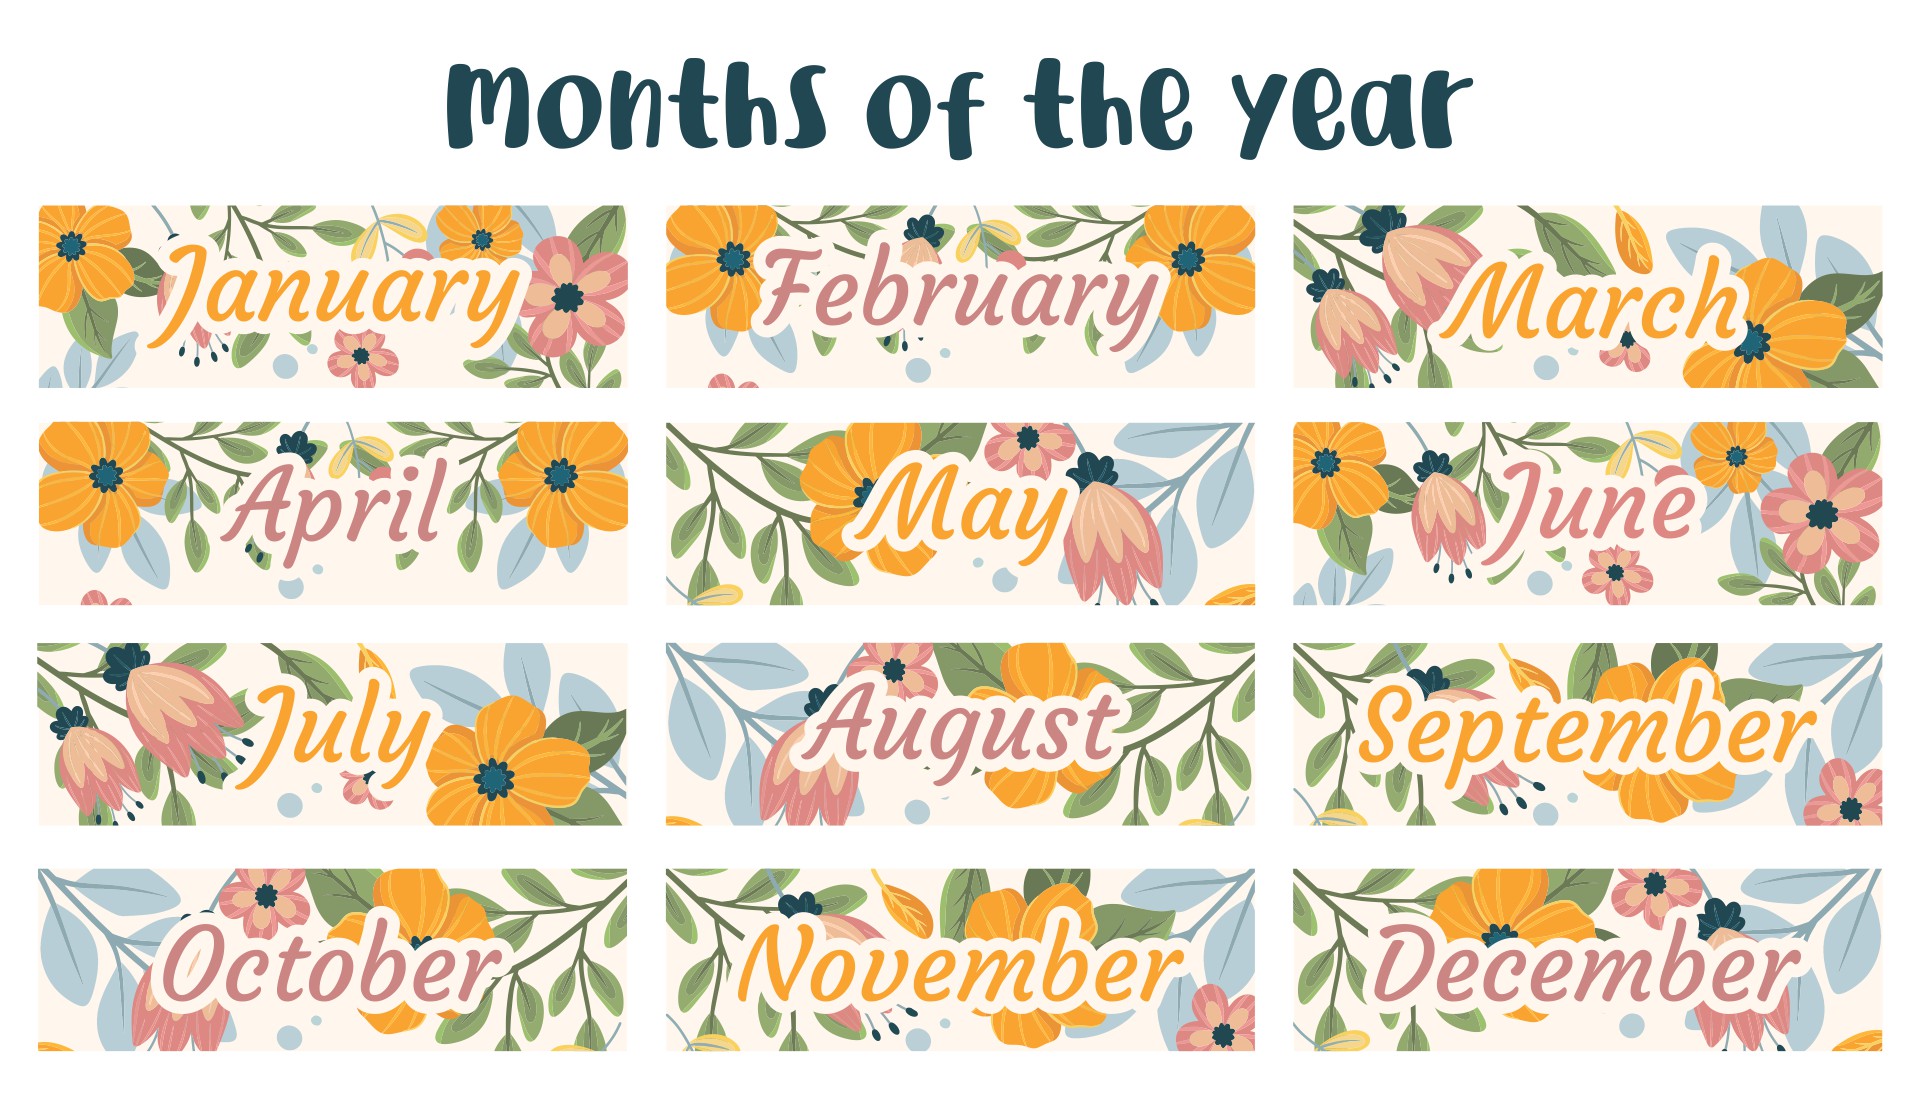 Printable Calender Month By Month Free printable calendars offer